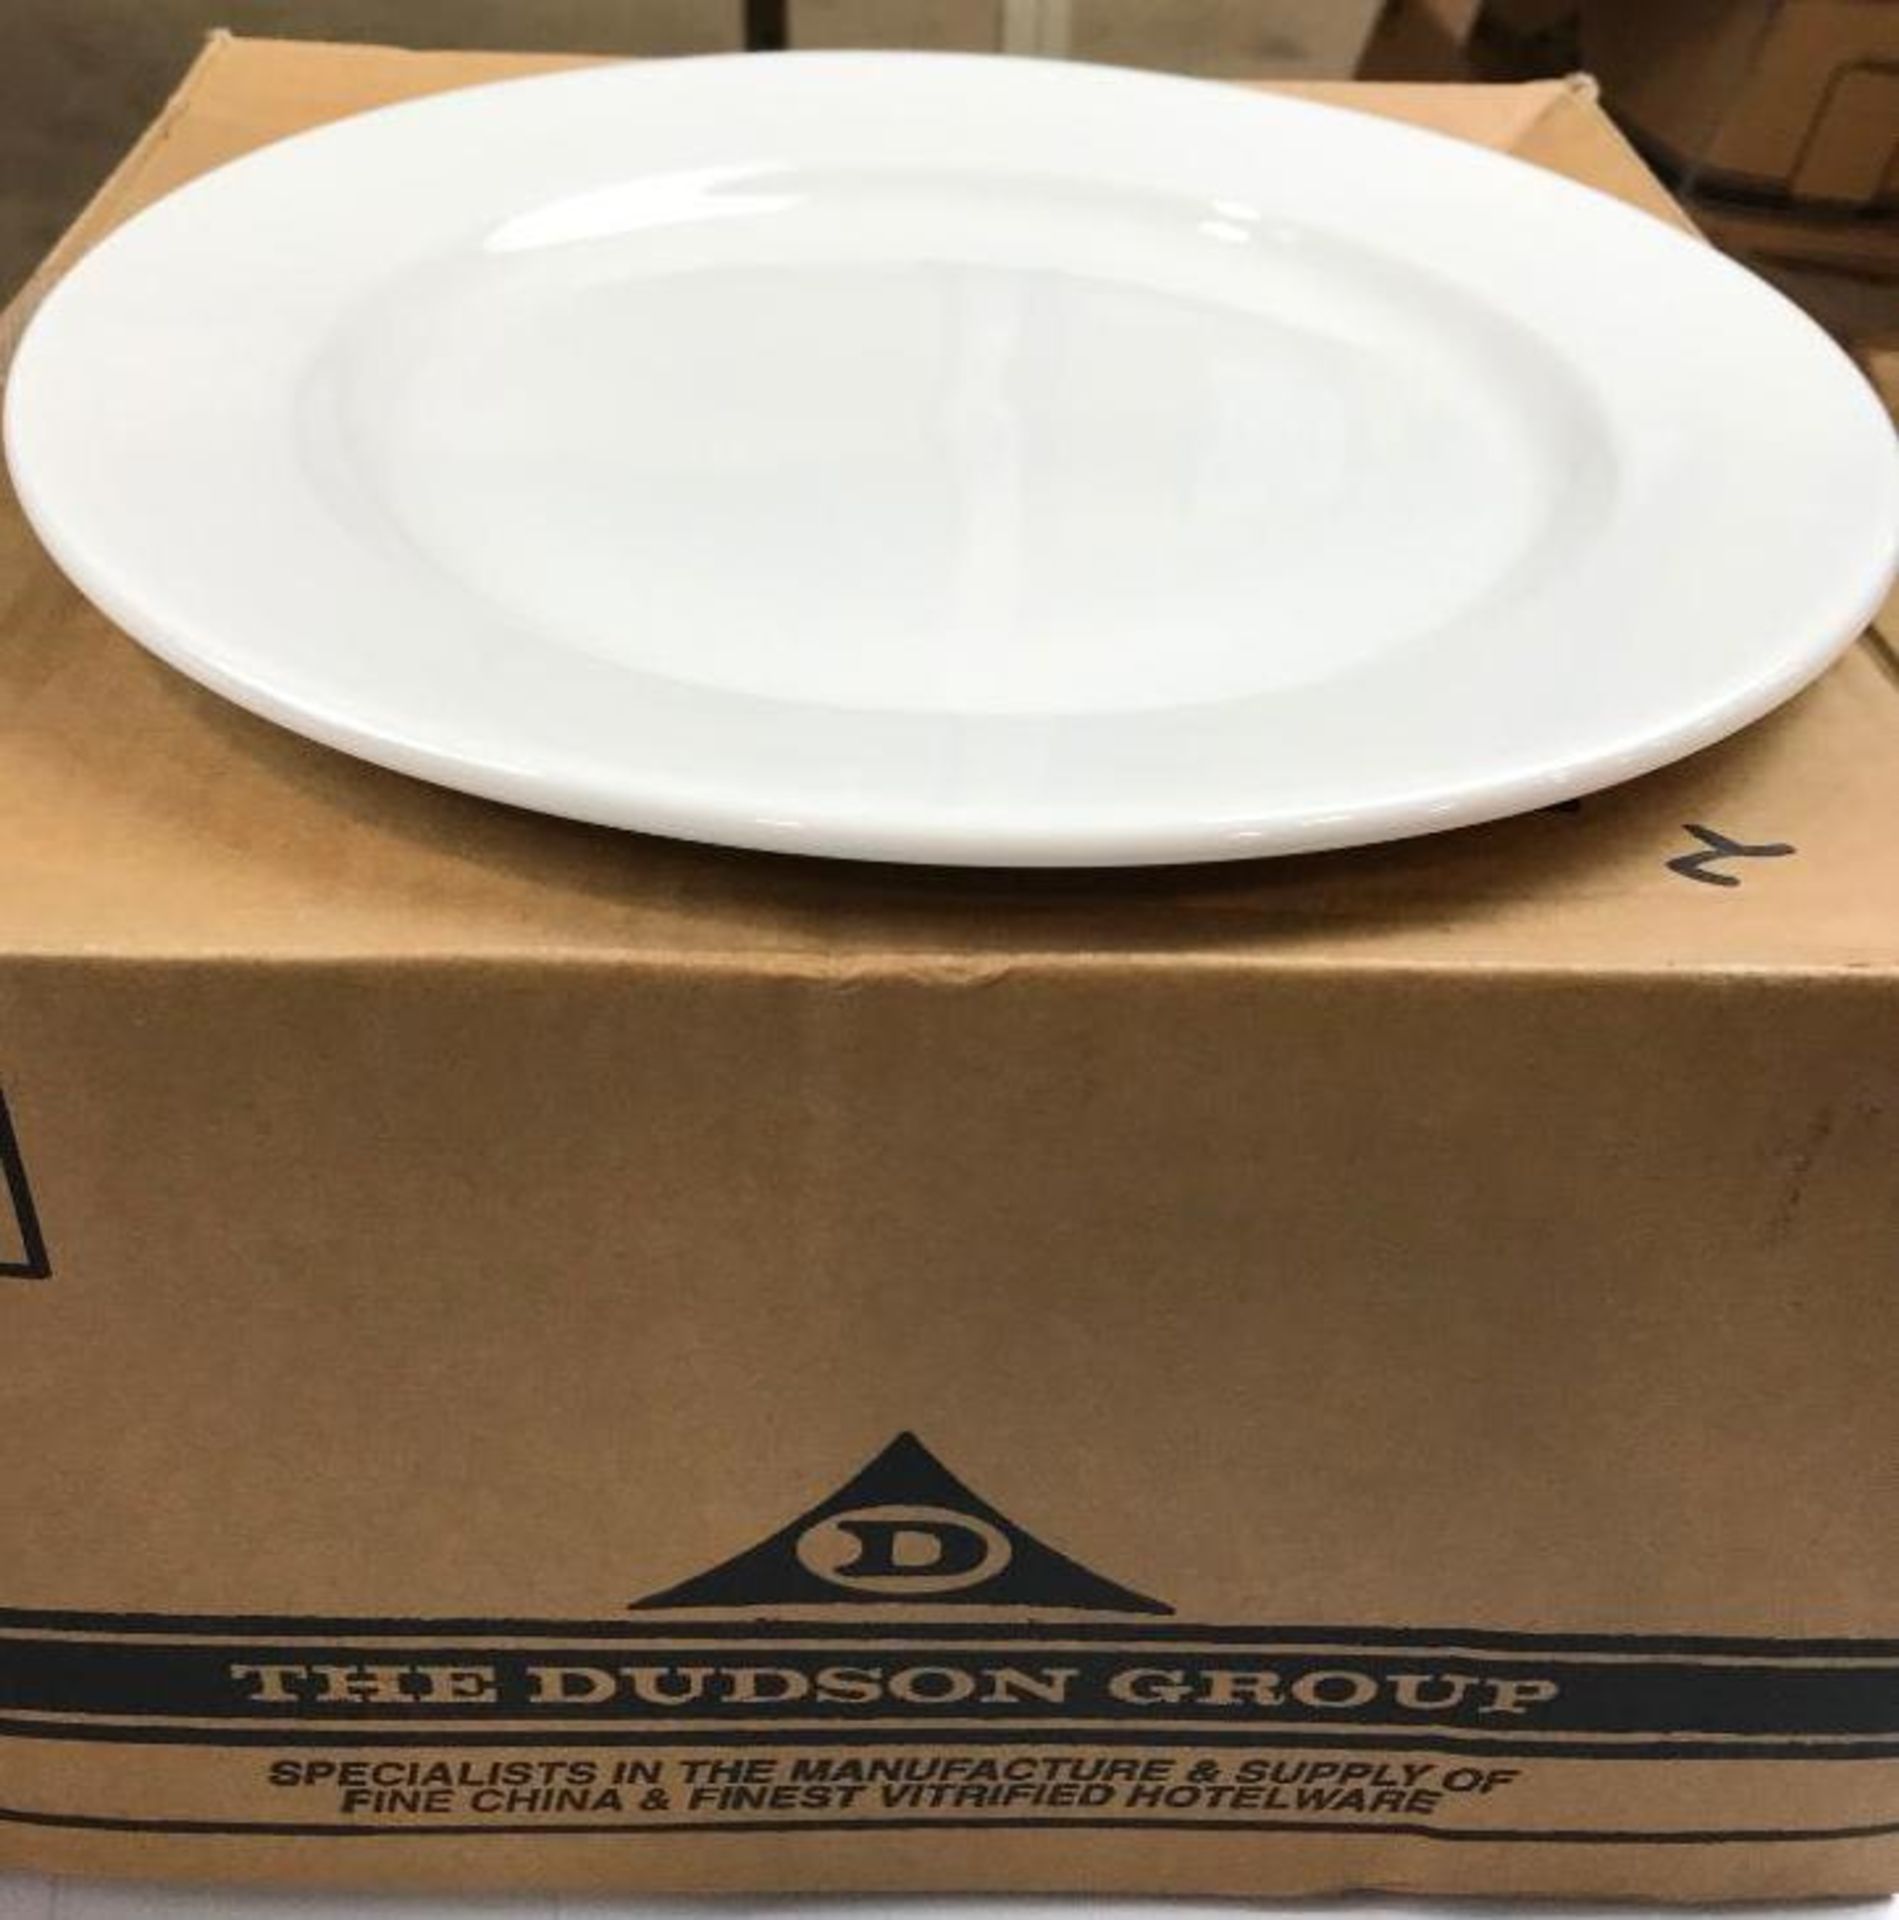 2 CASES OF DUDSON CLASSIC PLATE 12.5" - 12/CASE, MADE IN ENGLAND - Image 2 of 6